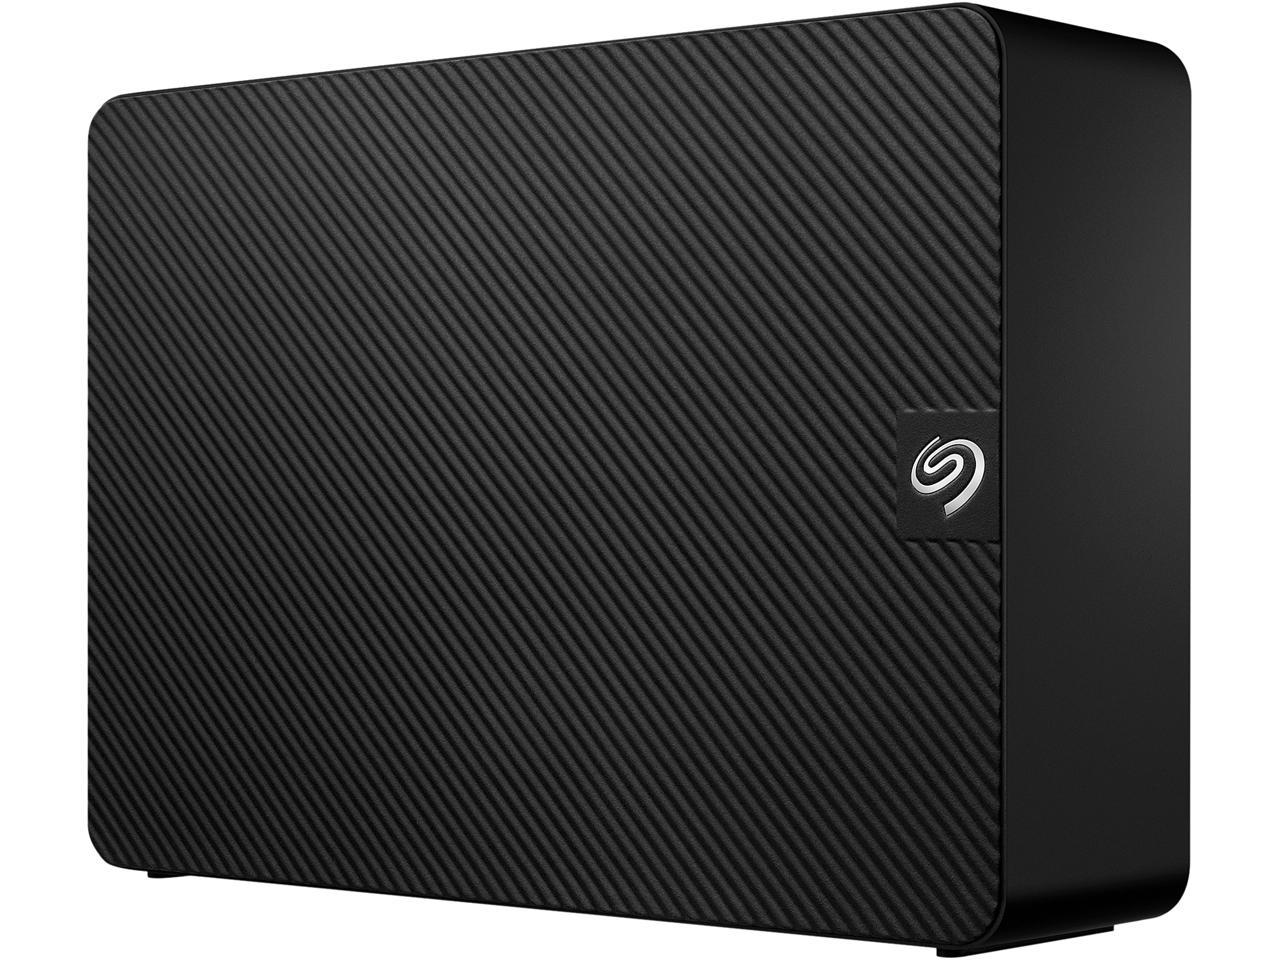 16TB Seagate Expansion External Hard Drive with Rescue Data Recovery Services $255